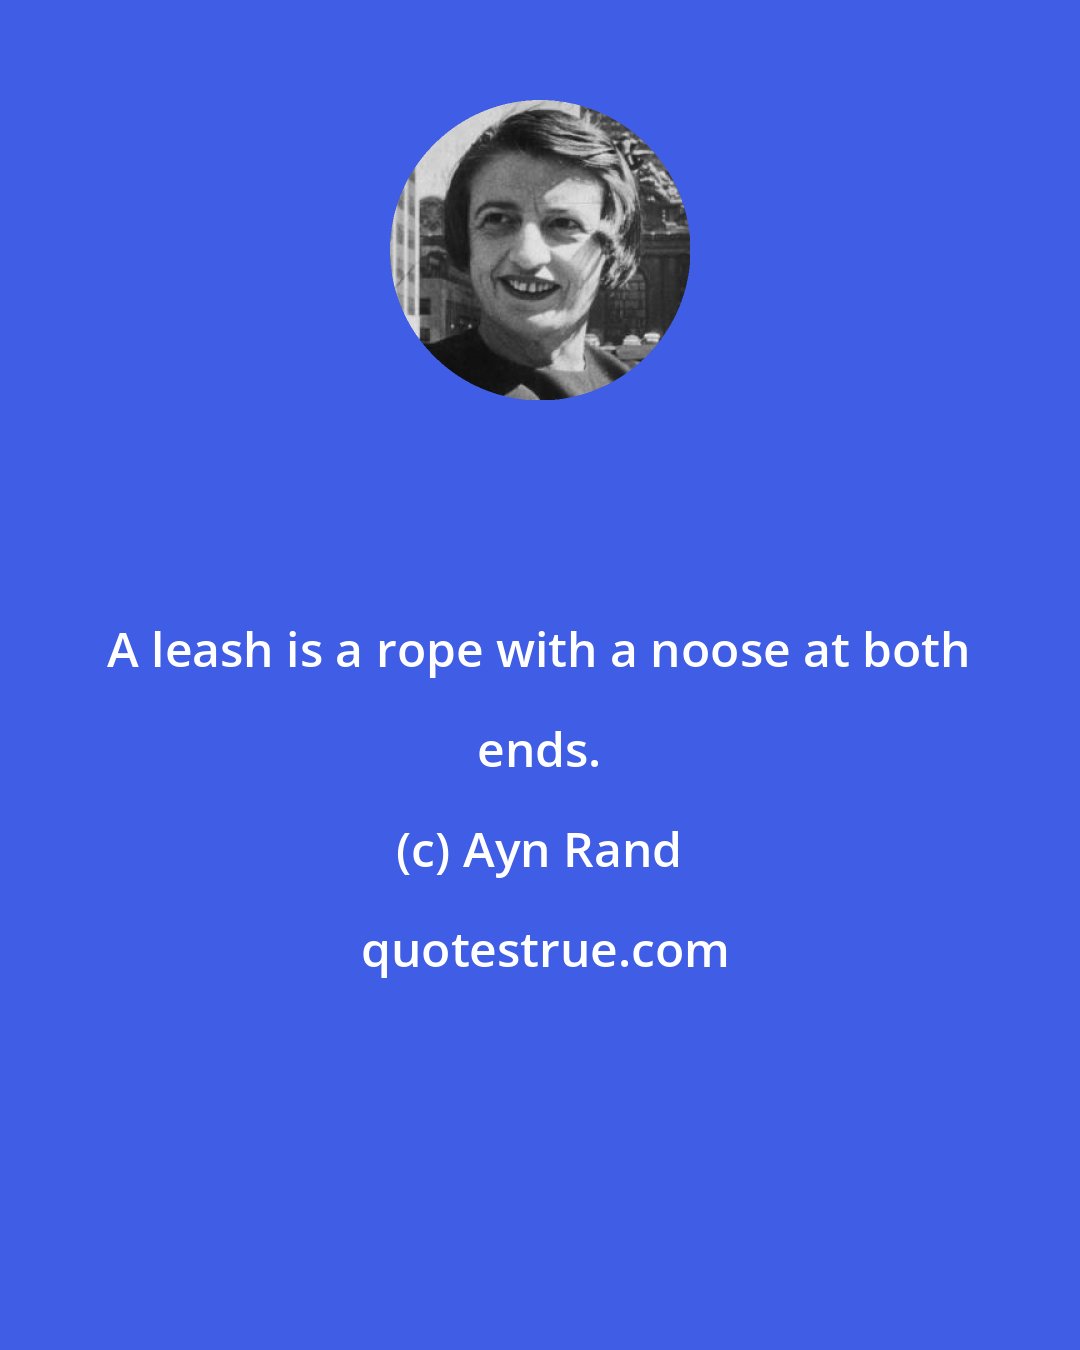 Ayn Rand: A leash is a rope with a noose at both ends.